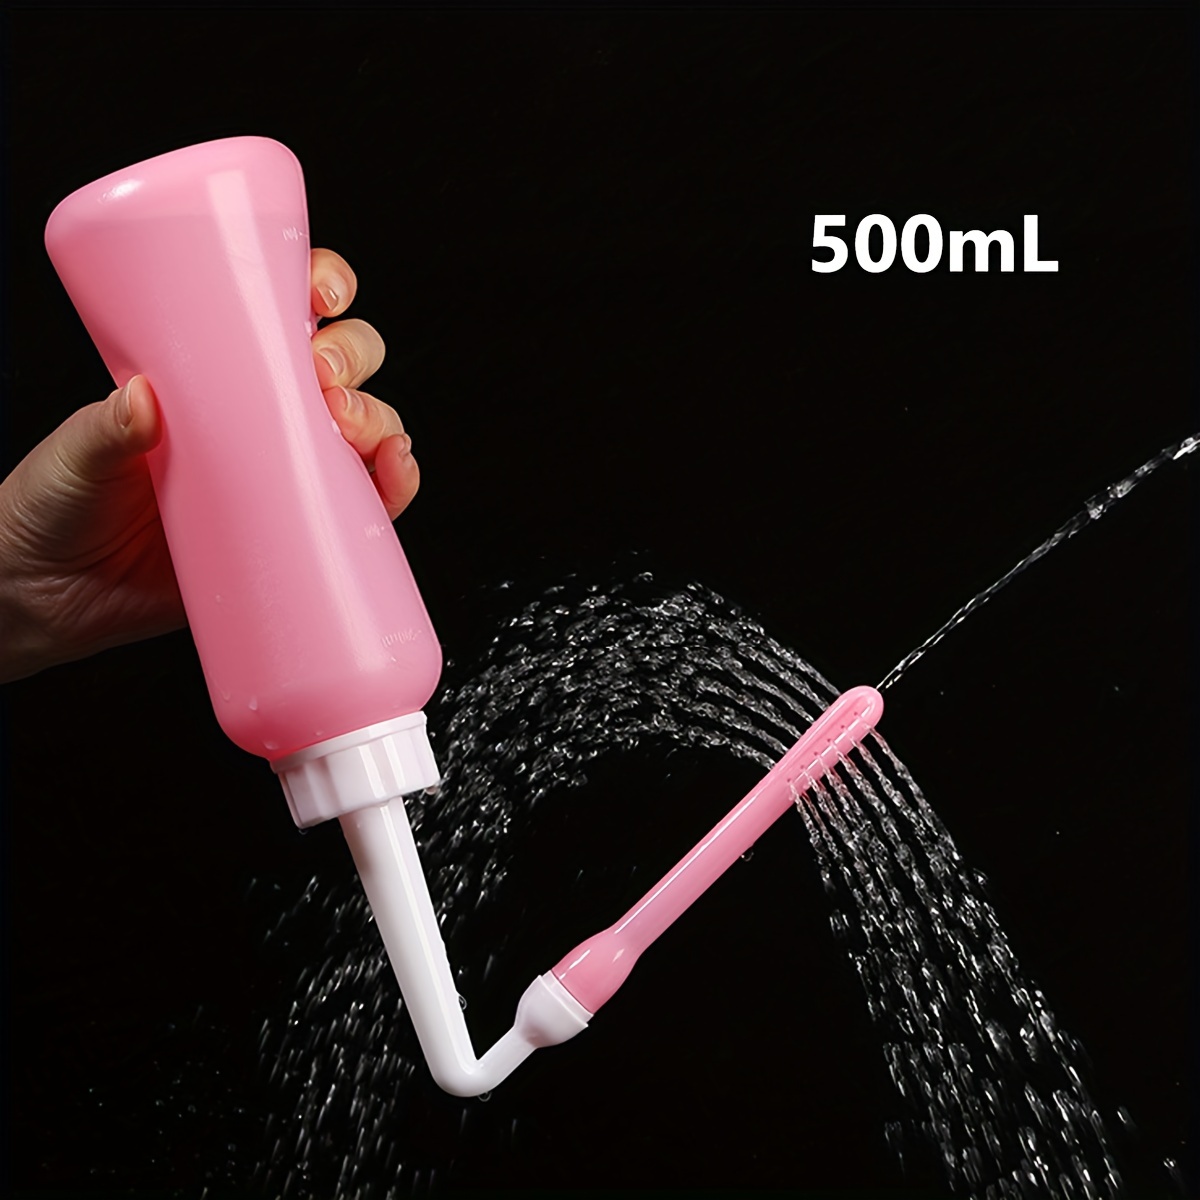 

1pc 500ml Irrigation Washer, Portable Bidet With 2 Types Of Nozzles, Reusable Cleaning System For Women, Cleaner, Rinser, Personal Hygiene Cleaning And Travel Use